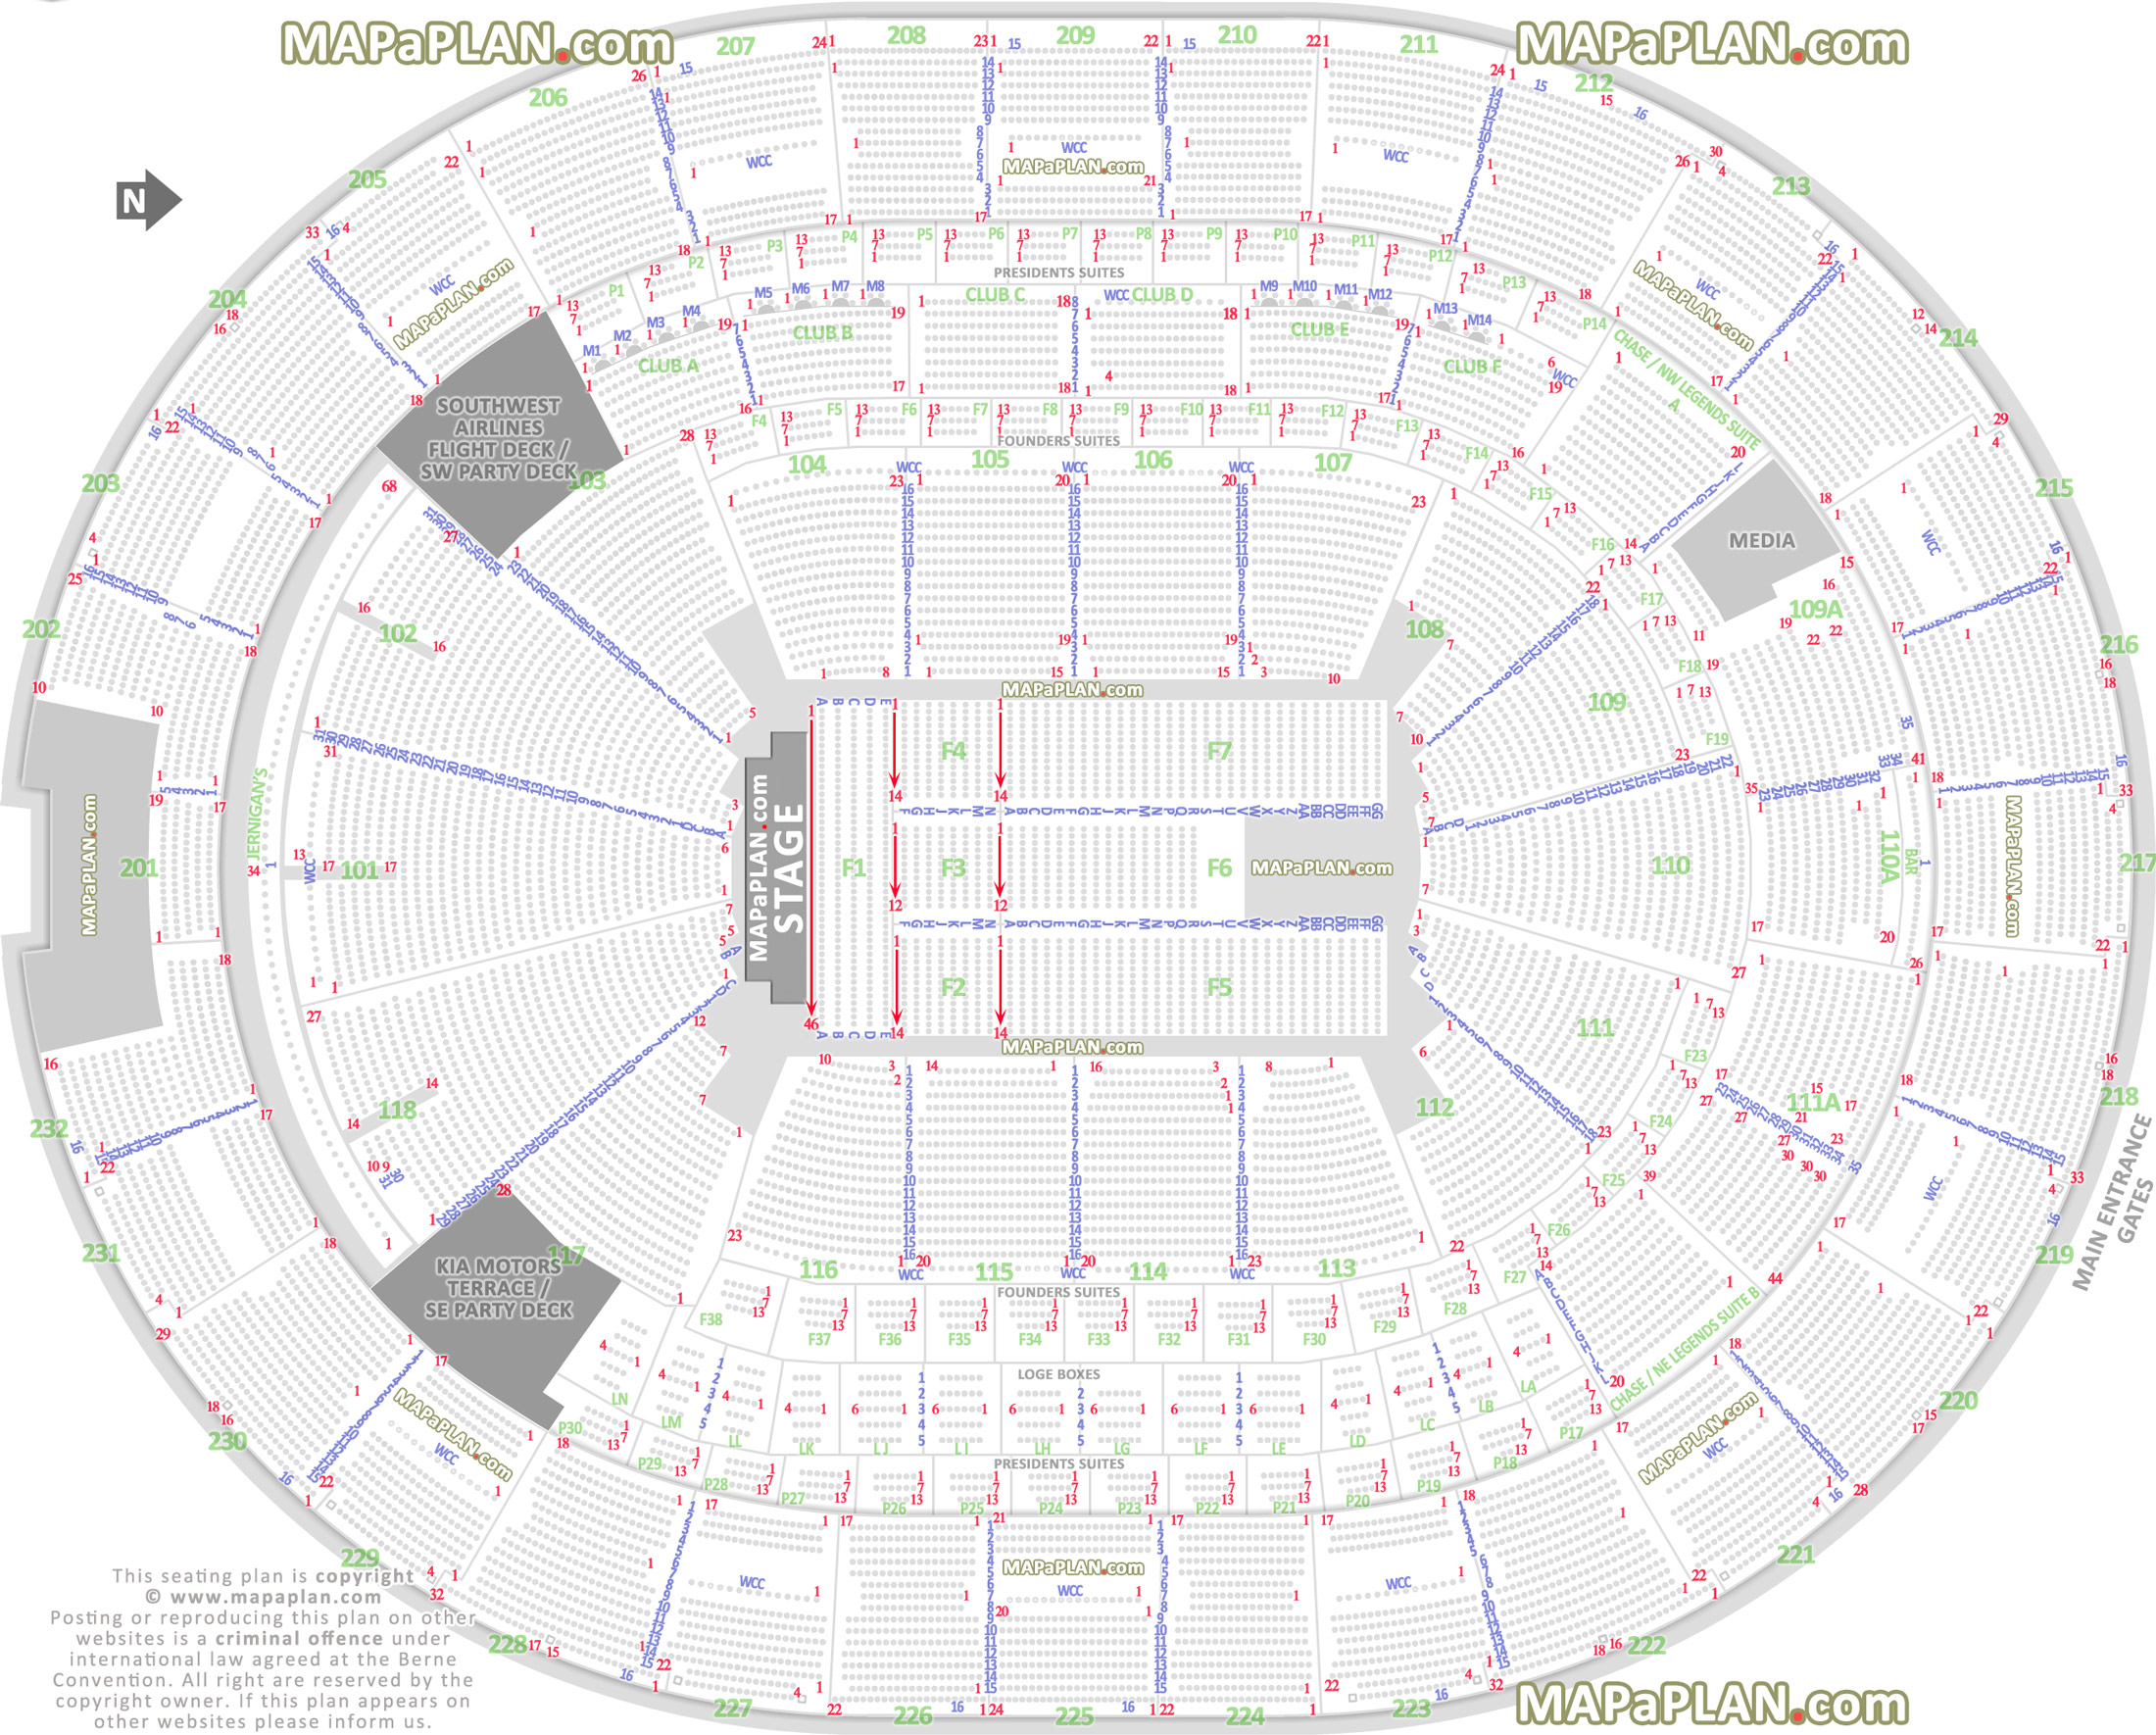 detailed seat row numbers end stage concert sections floor plan map arena lower upper bowl layout Orlando Kia Center seating chart